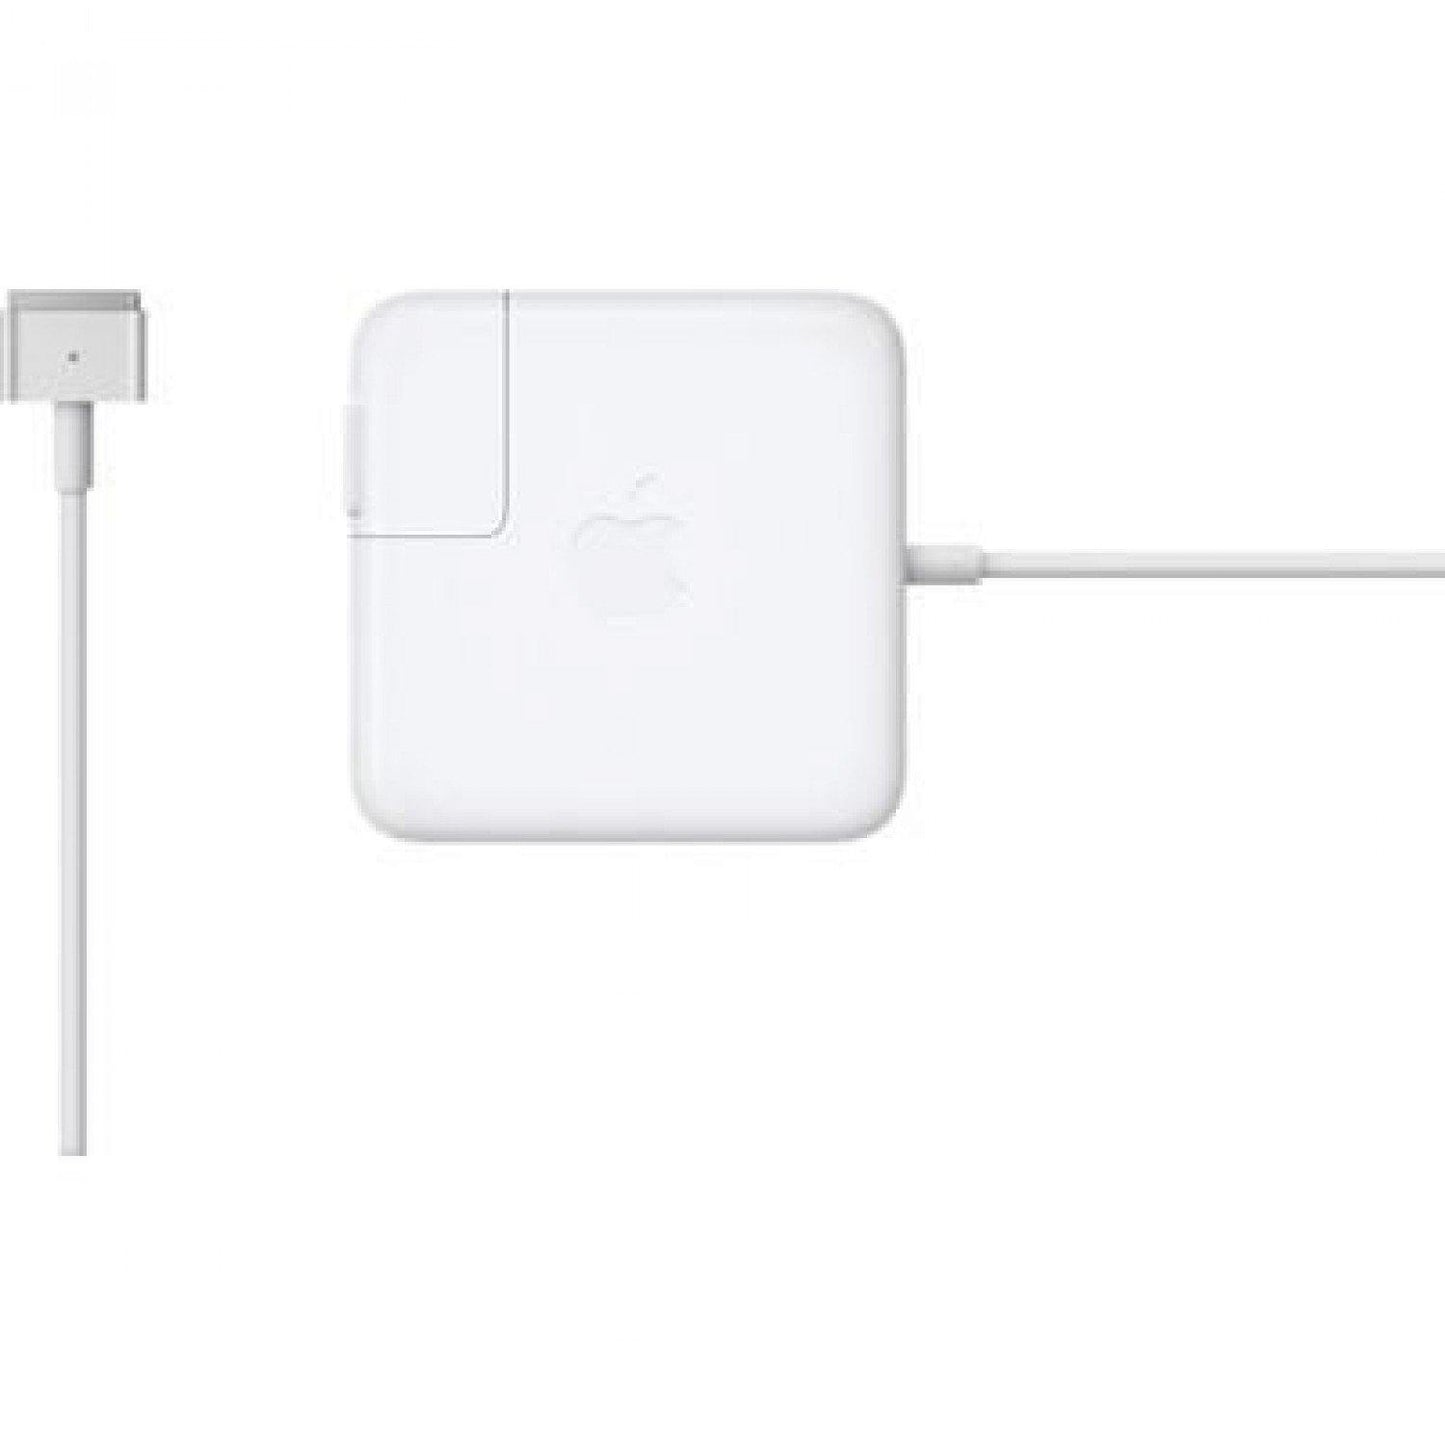 MagSafe 2 Power Charger Adapter for Apple MacBook - 85W - PCMaster Pro 